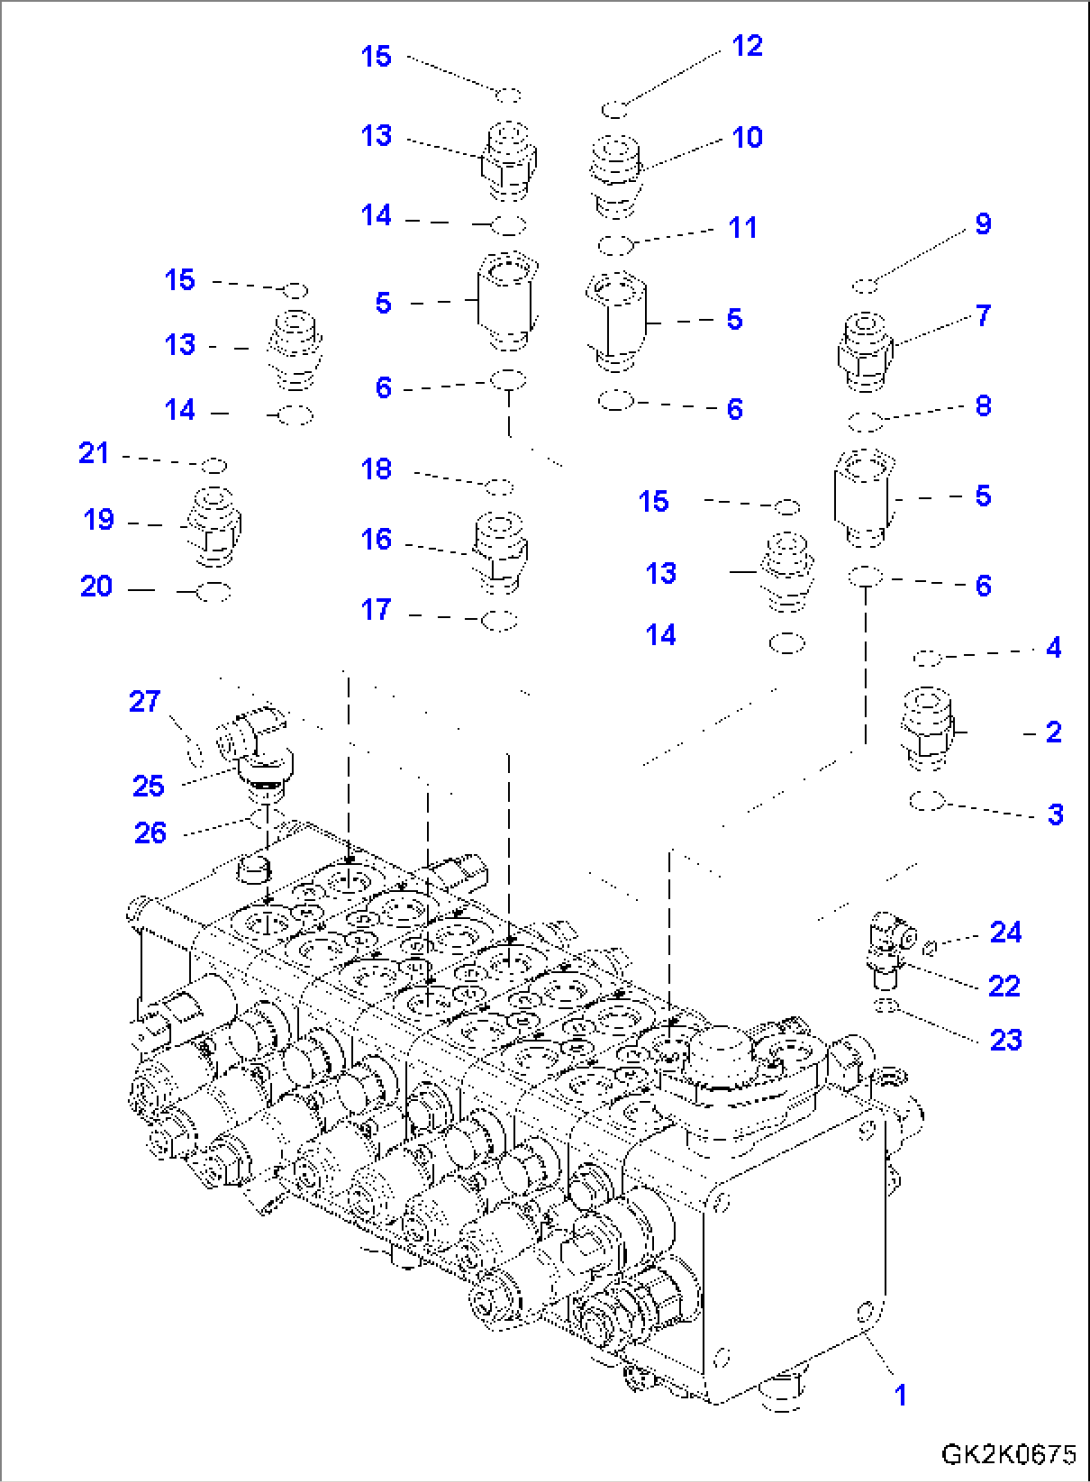 MAIN VALVE (8-SPOOL/ONE-PIECE BOOM) - CONNECTING PARTS (1/4)